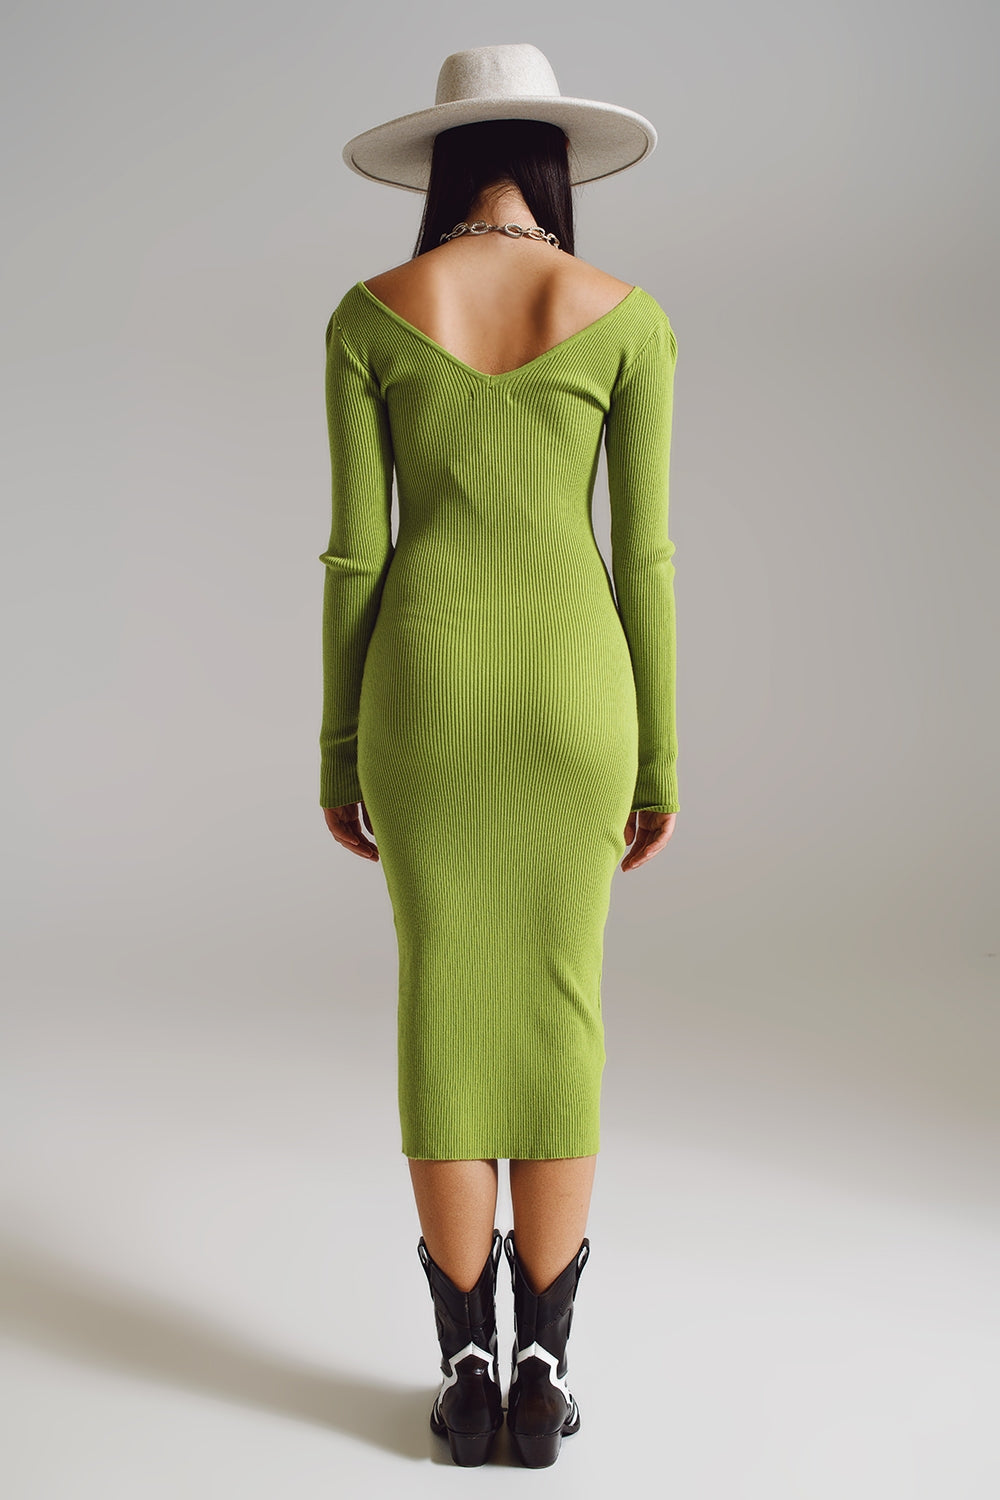 Midi Bodycon Knitted Dress With V-Neck in Green.